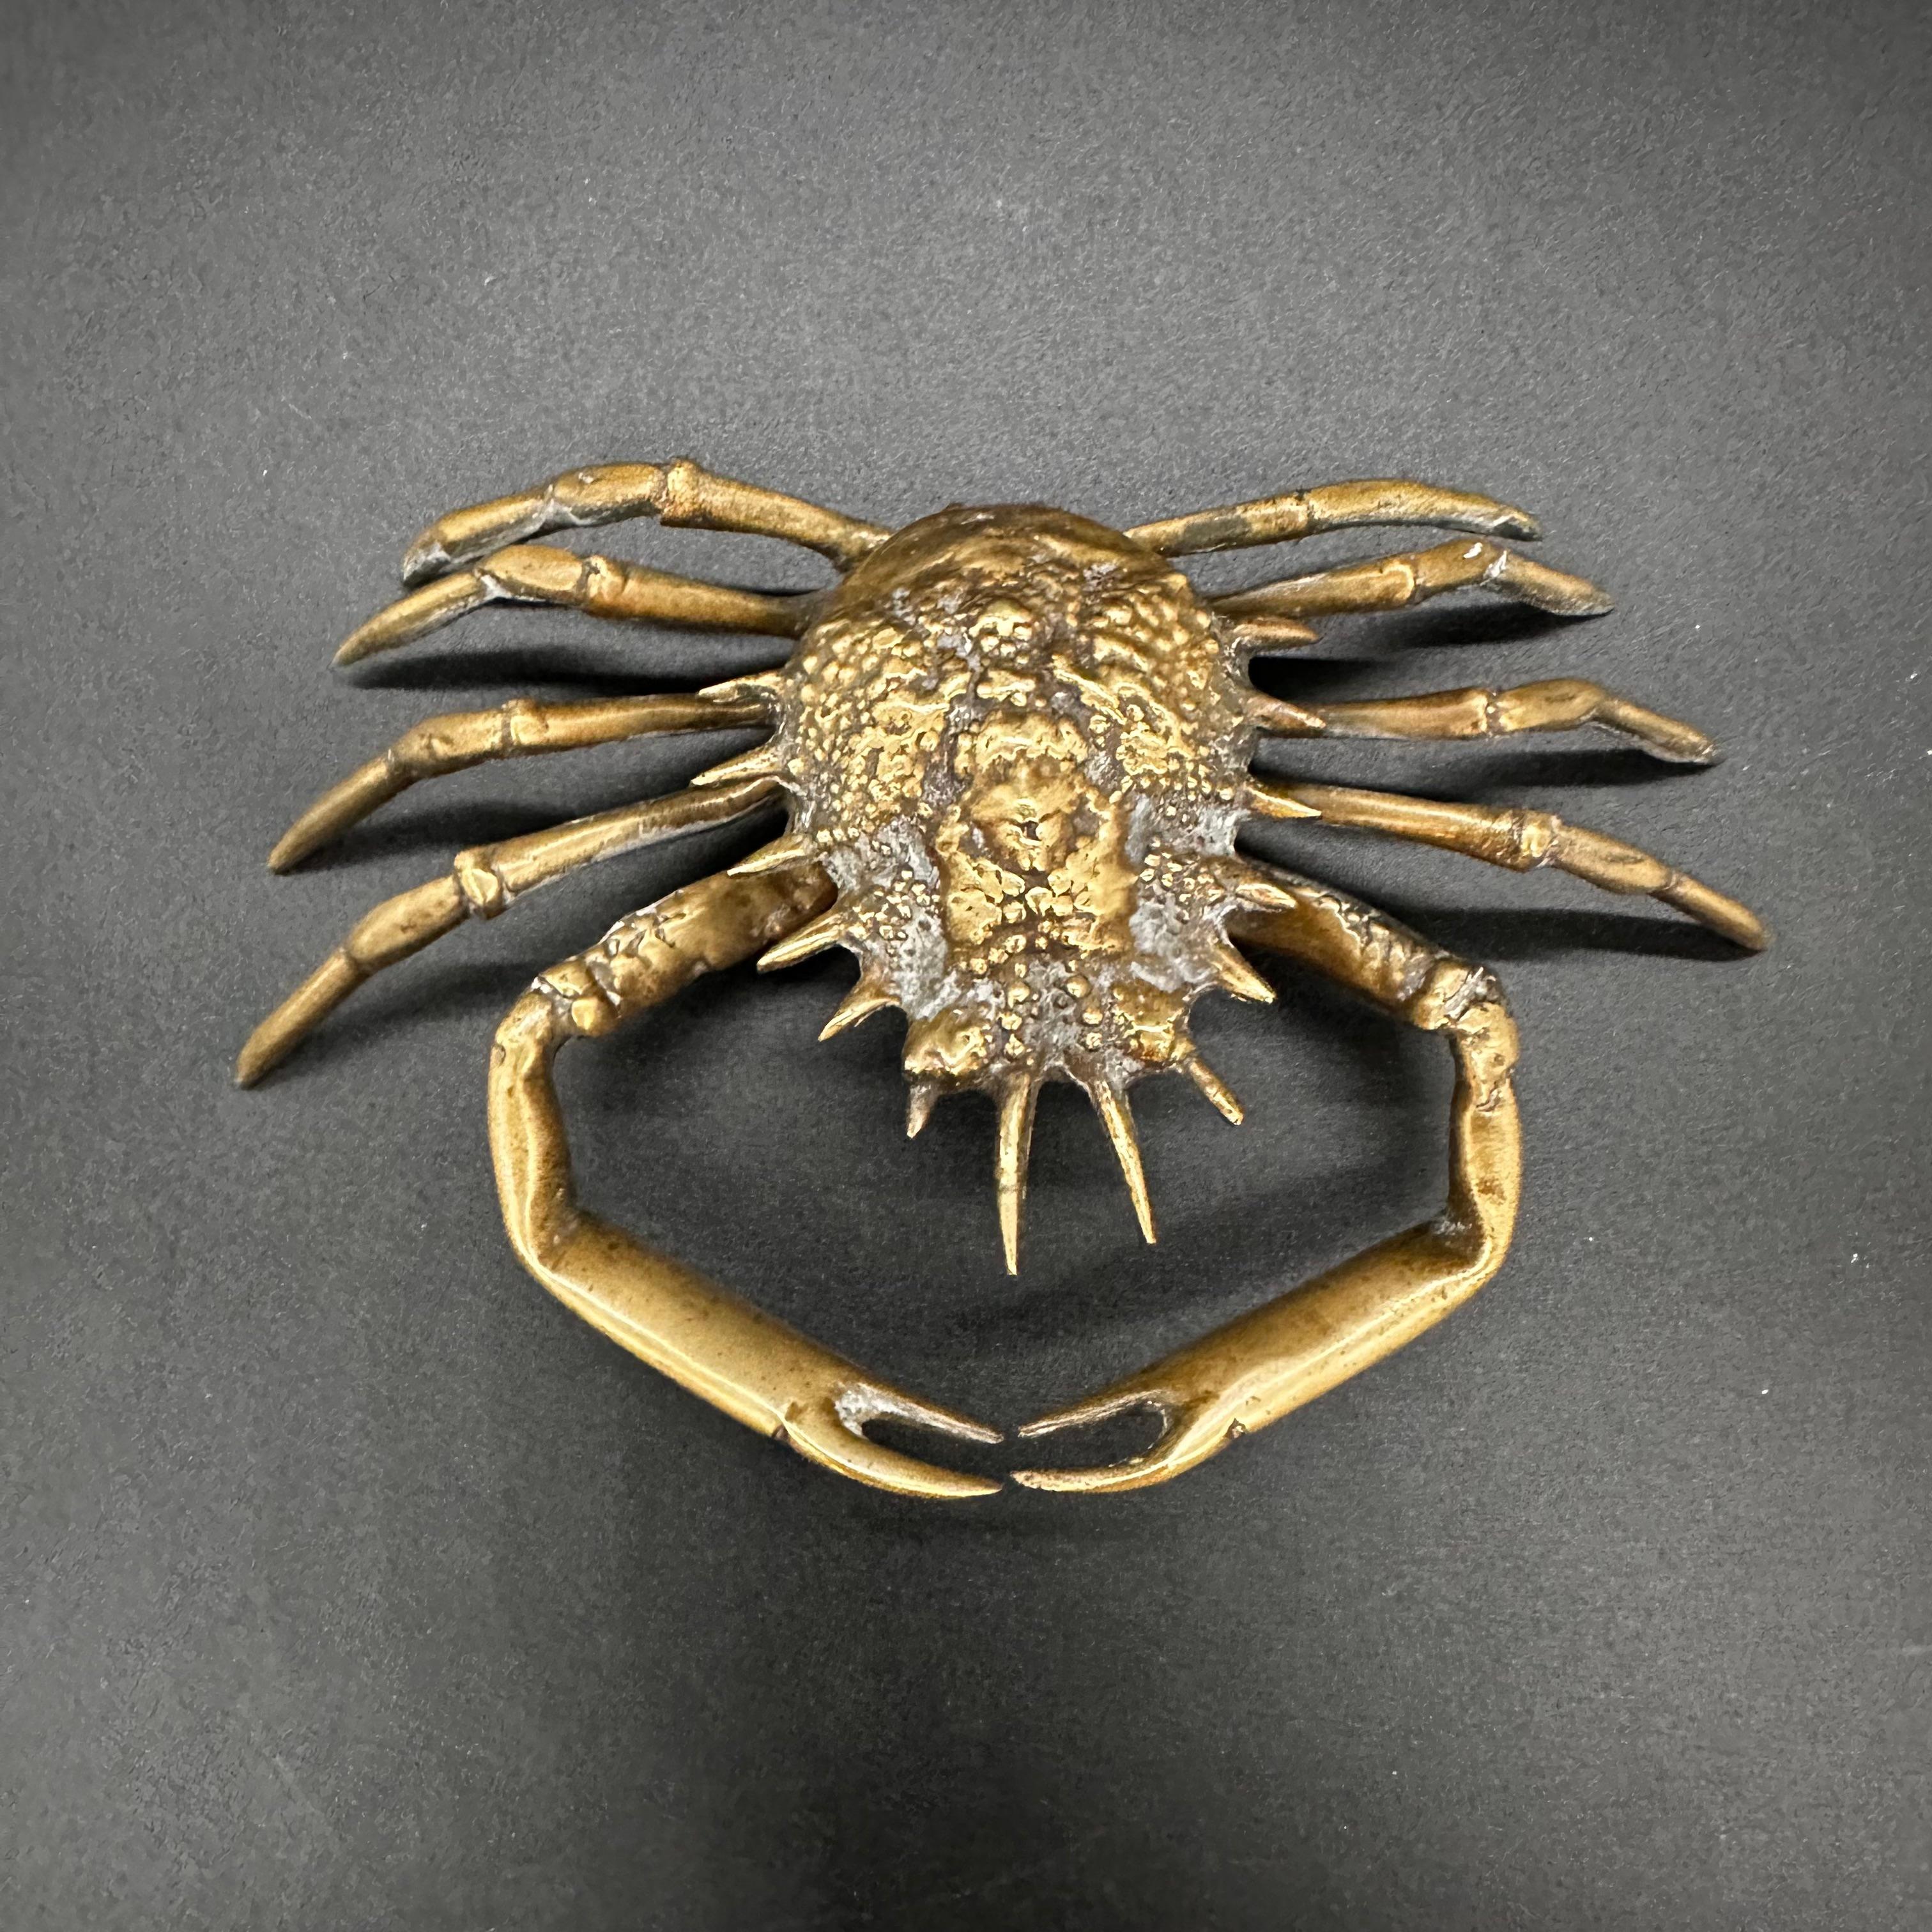 The Vintage Italian Decorative Crab Sculpture from the 1980s showcases the creativity and artistry of Italian design. Crafted with attention to detail, this captivating crab sculpture adds a whimsical touch to any decor, combining the allure of